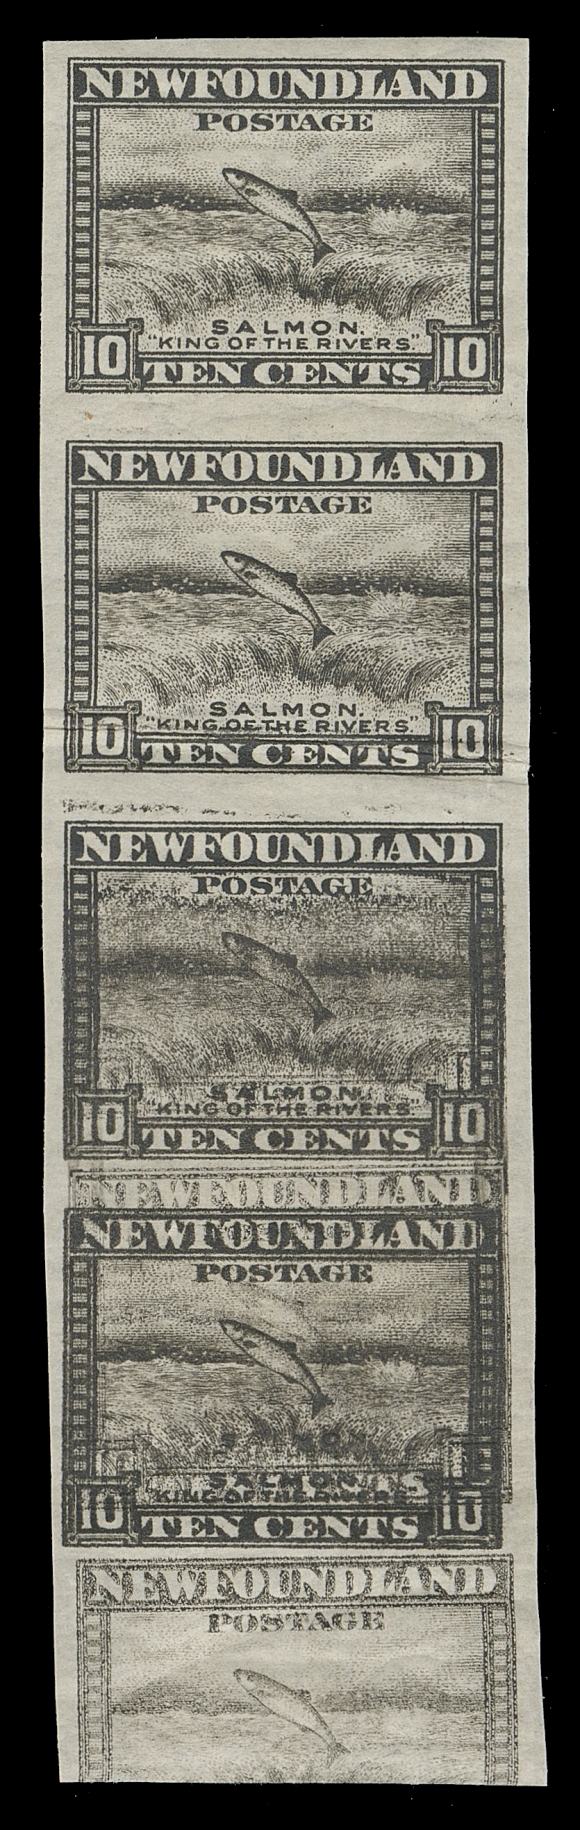 THE AFAB COLLECTION - NEWFOUNDLAND 1897-1947 ISSUES  193iii,Mint vertical imperforate strip of four with margin at foot, showing a dramatic double printing error on bottom pair and lower margin, horizontal paper fold running through foot of second stamp (likely the cause of this remarkable printing error), the important lower pair is in choice VF NH condition